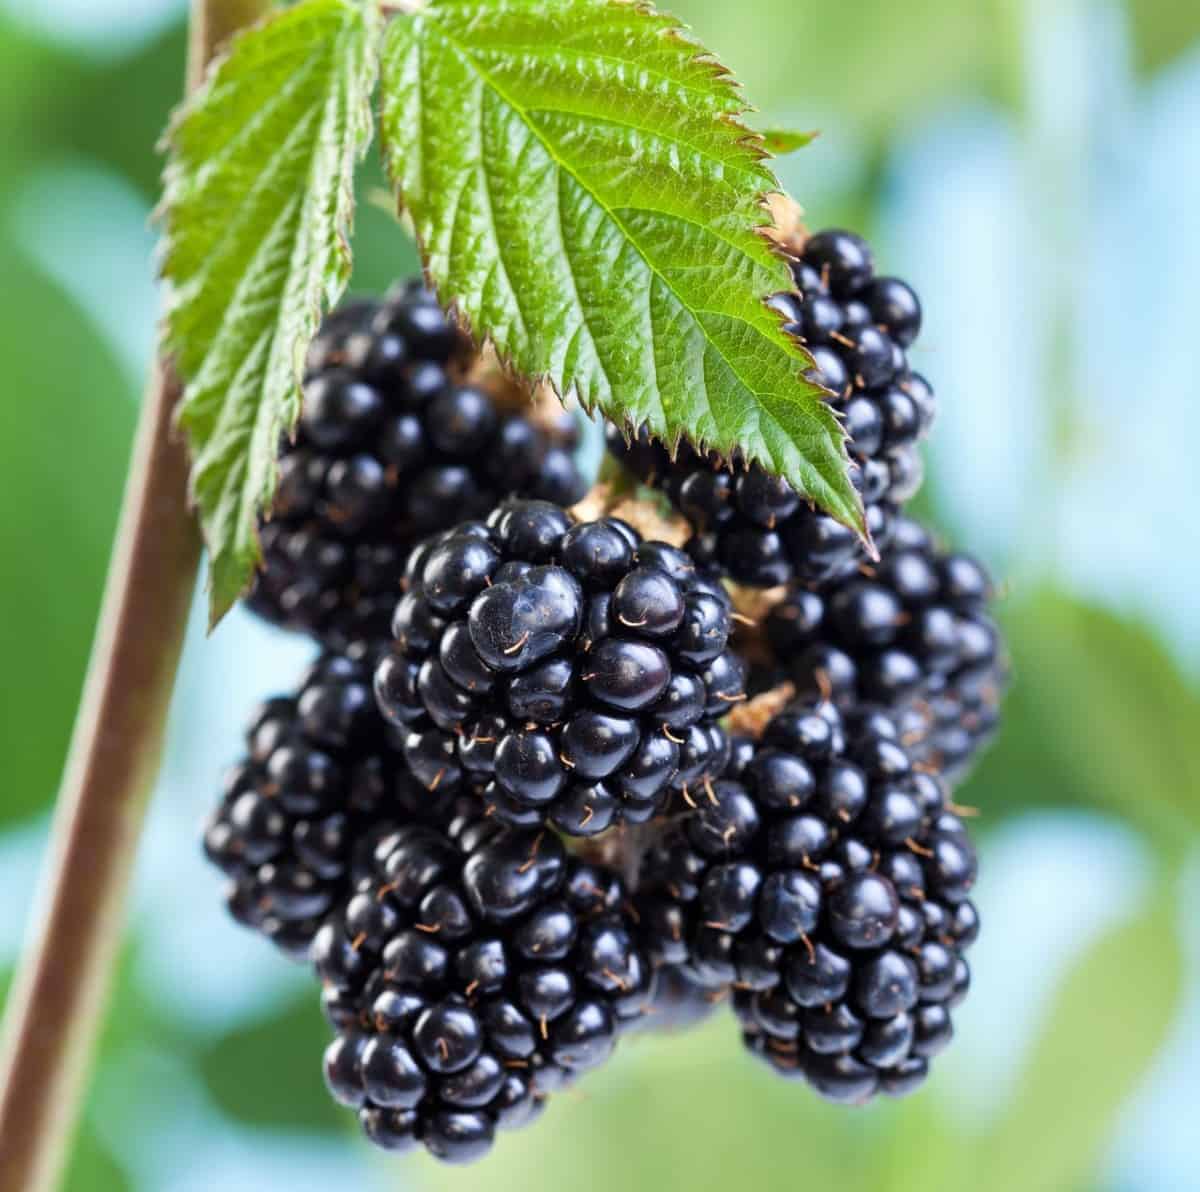 People and animals love blackberry shrubs.